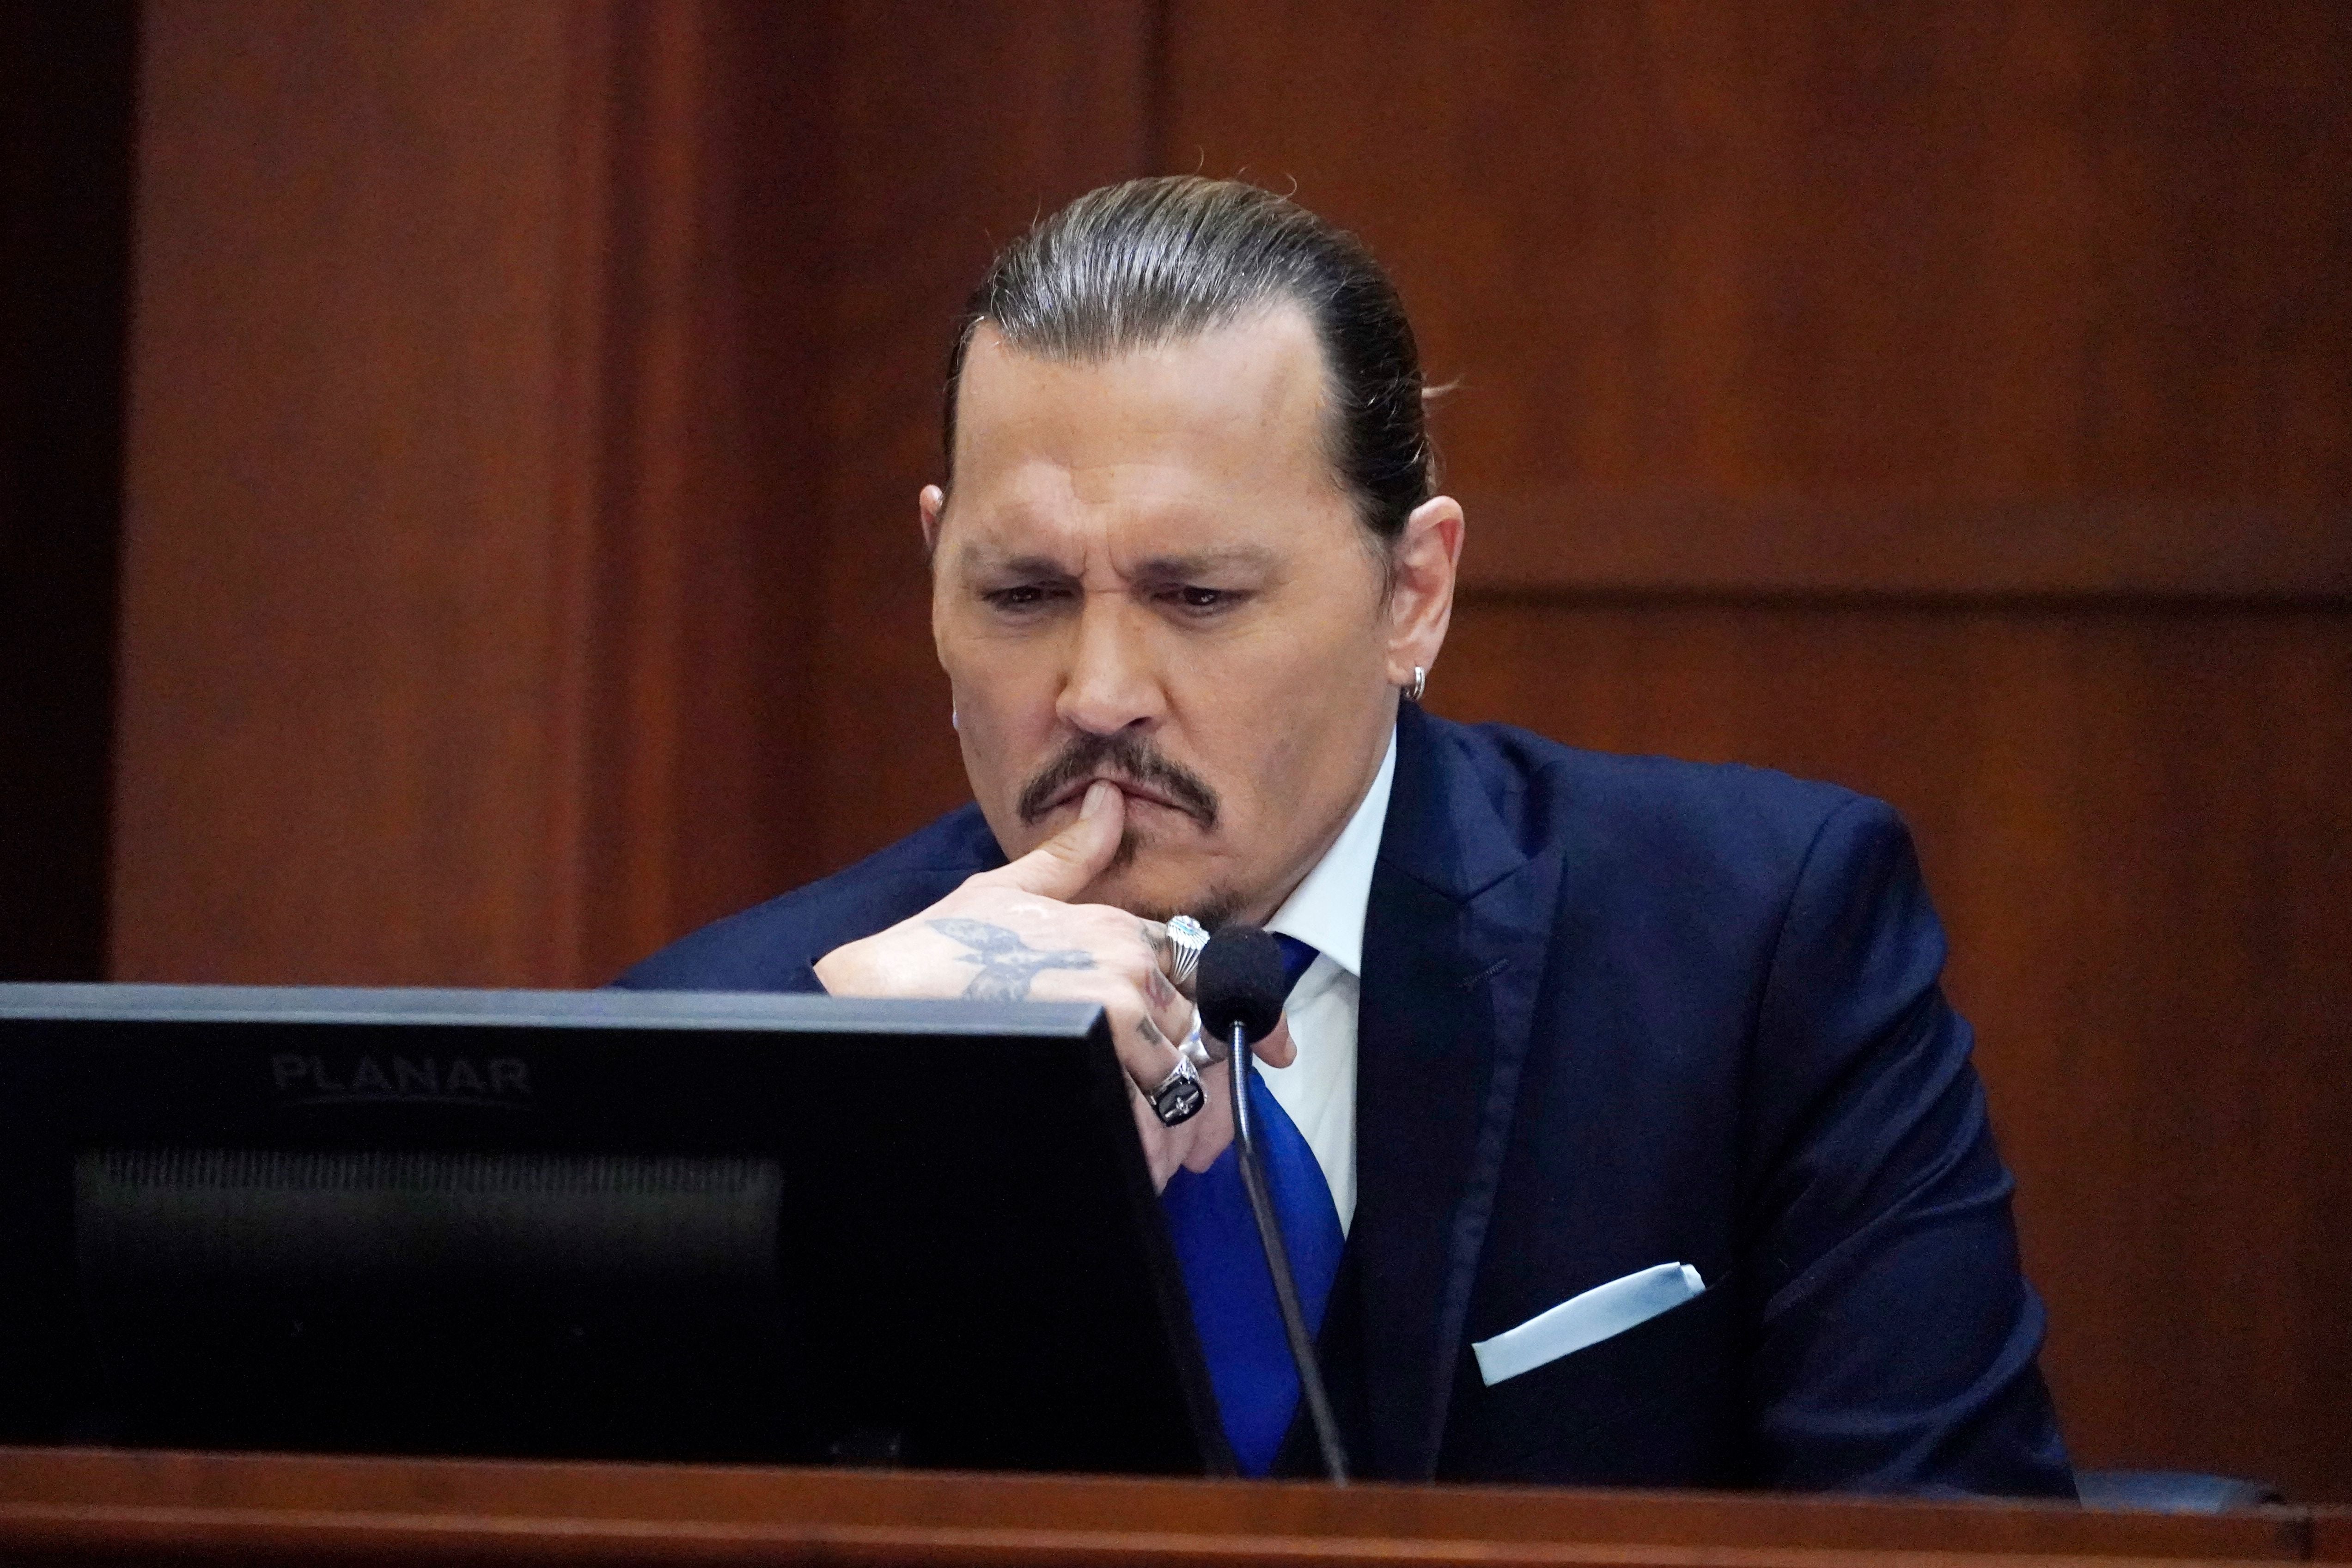 Johnny Depp testifies at the Fairfax County Courthouse in Fairfax, Virginia on 25 April 2022